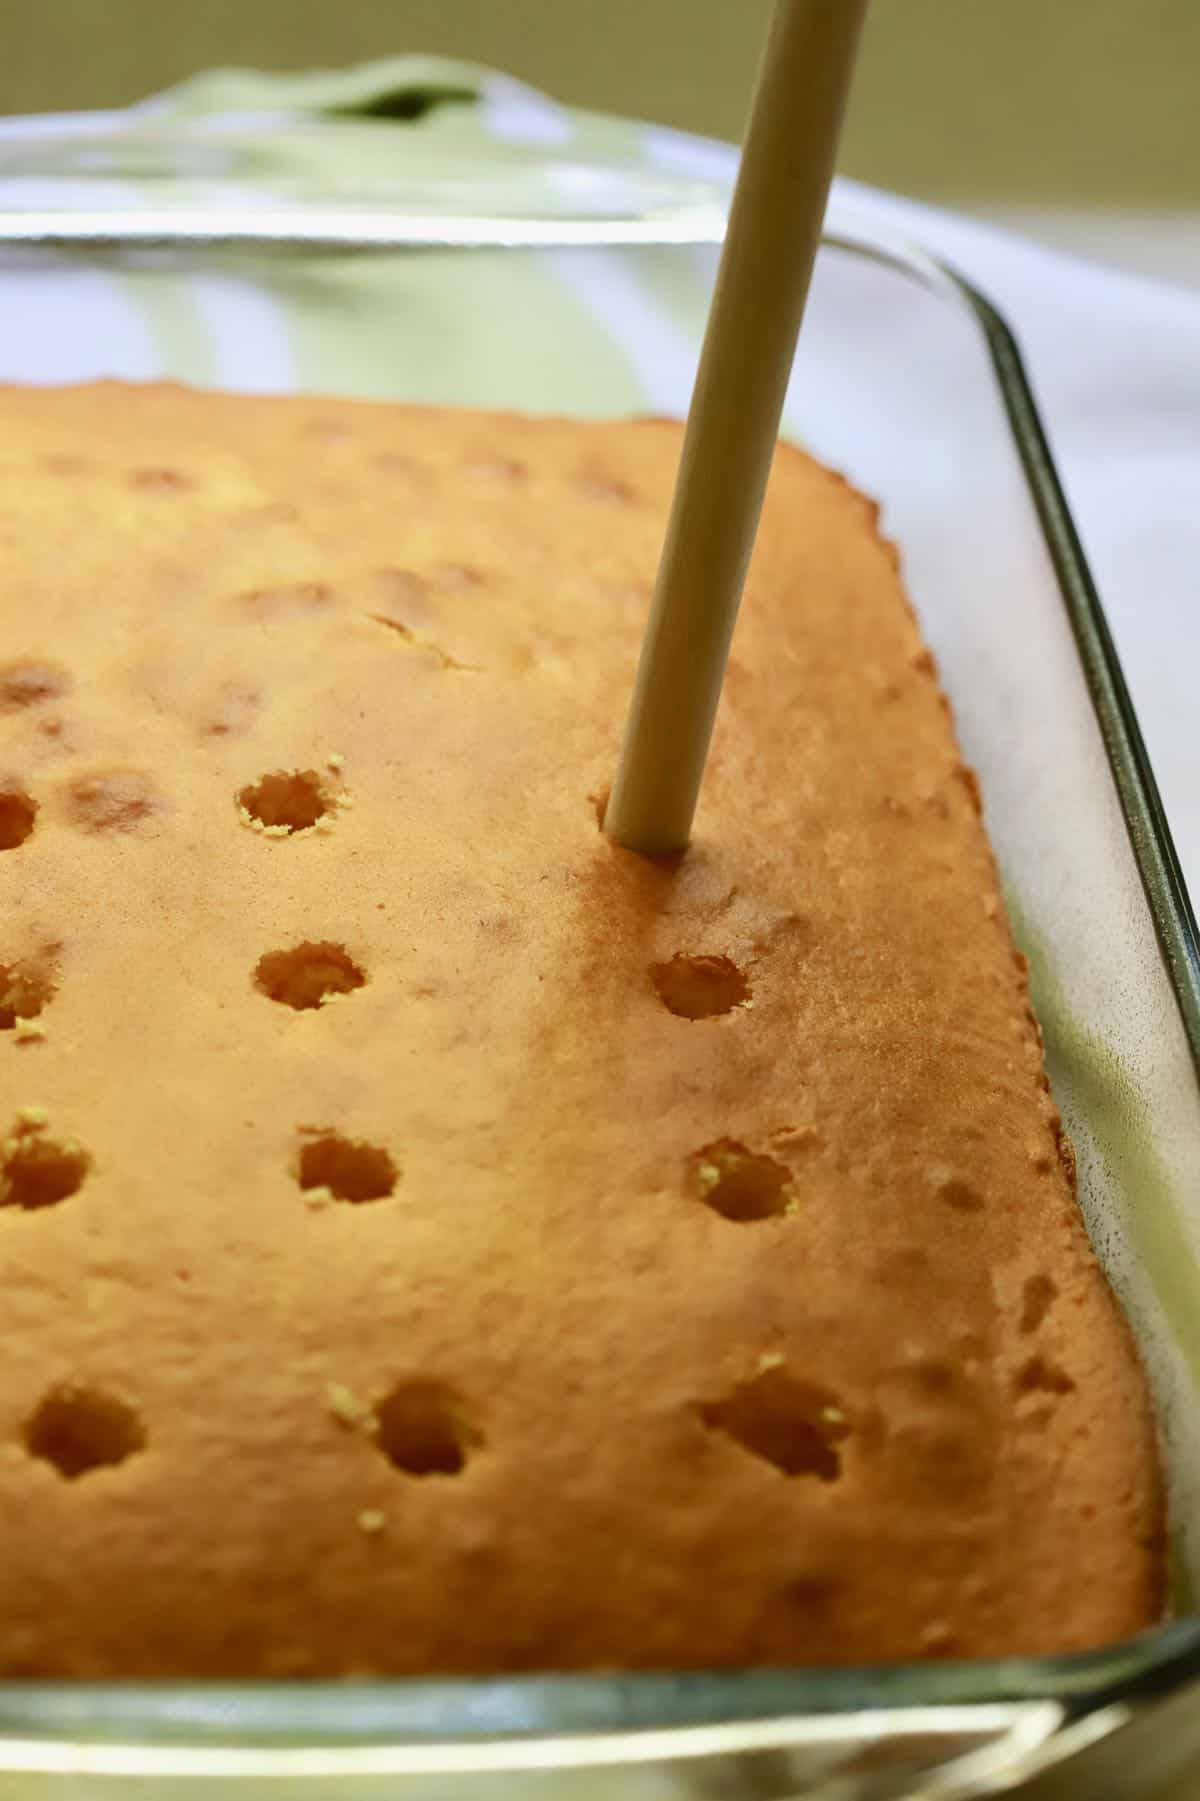 Poking holes into a sheet cake using a wooden spoon handle. 